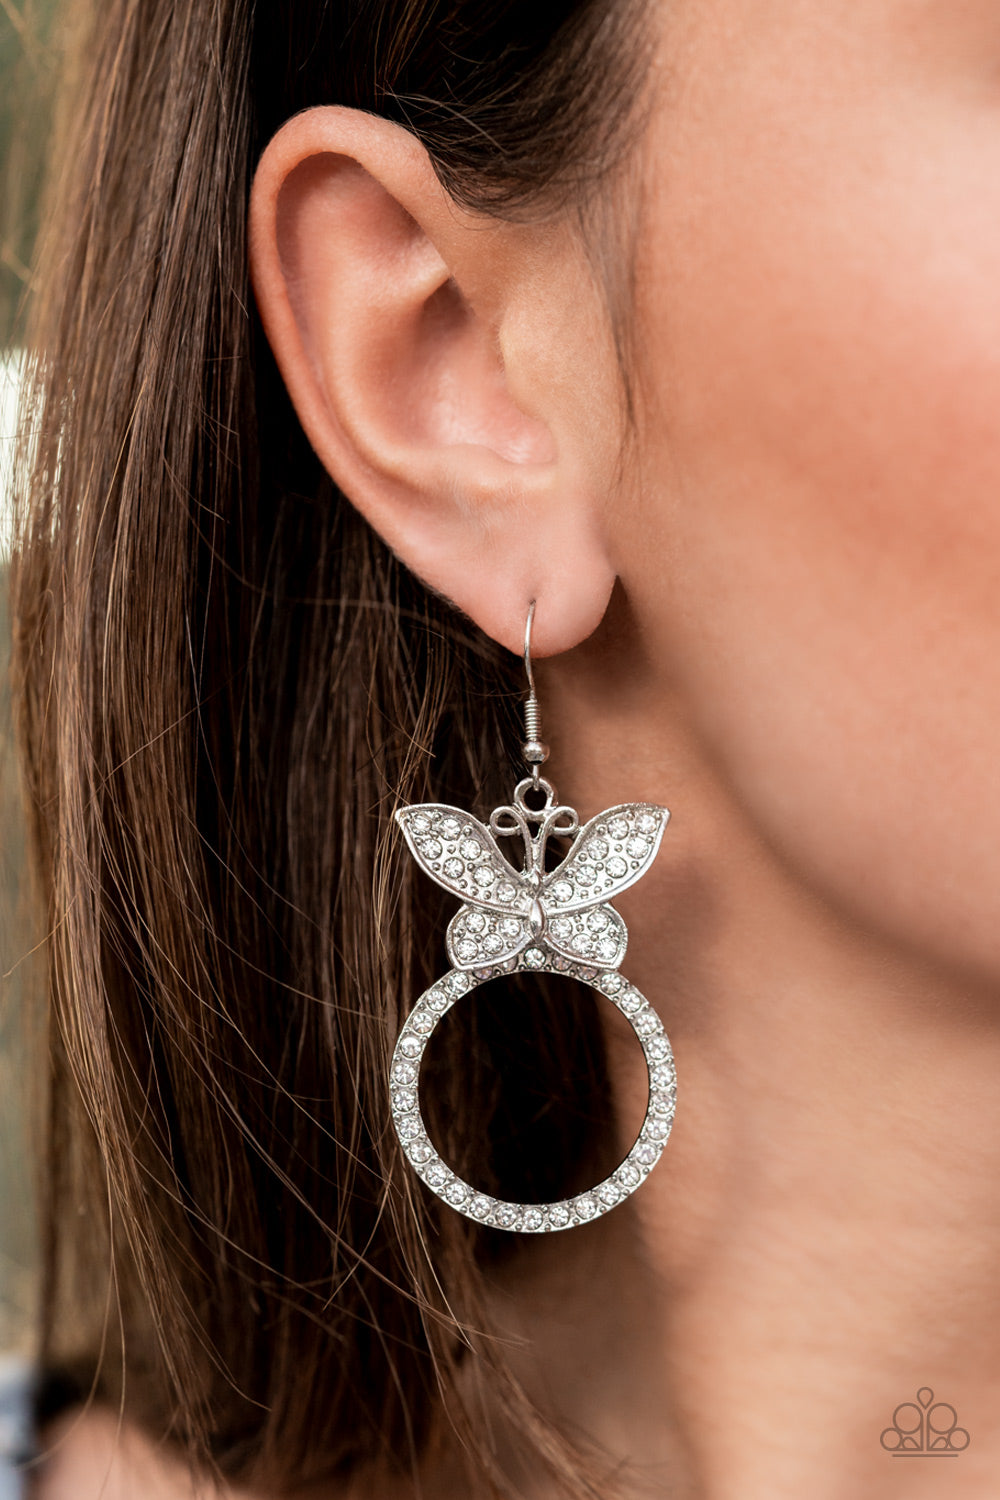 Paradise Found - White Butterfly Earrings November 2021 Life of the Party Exclusive - Princess Glam Shop